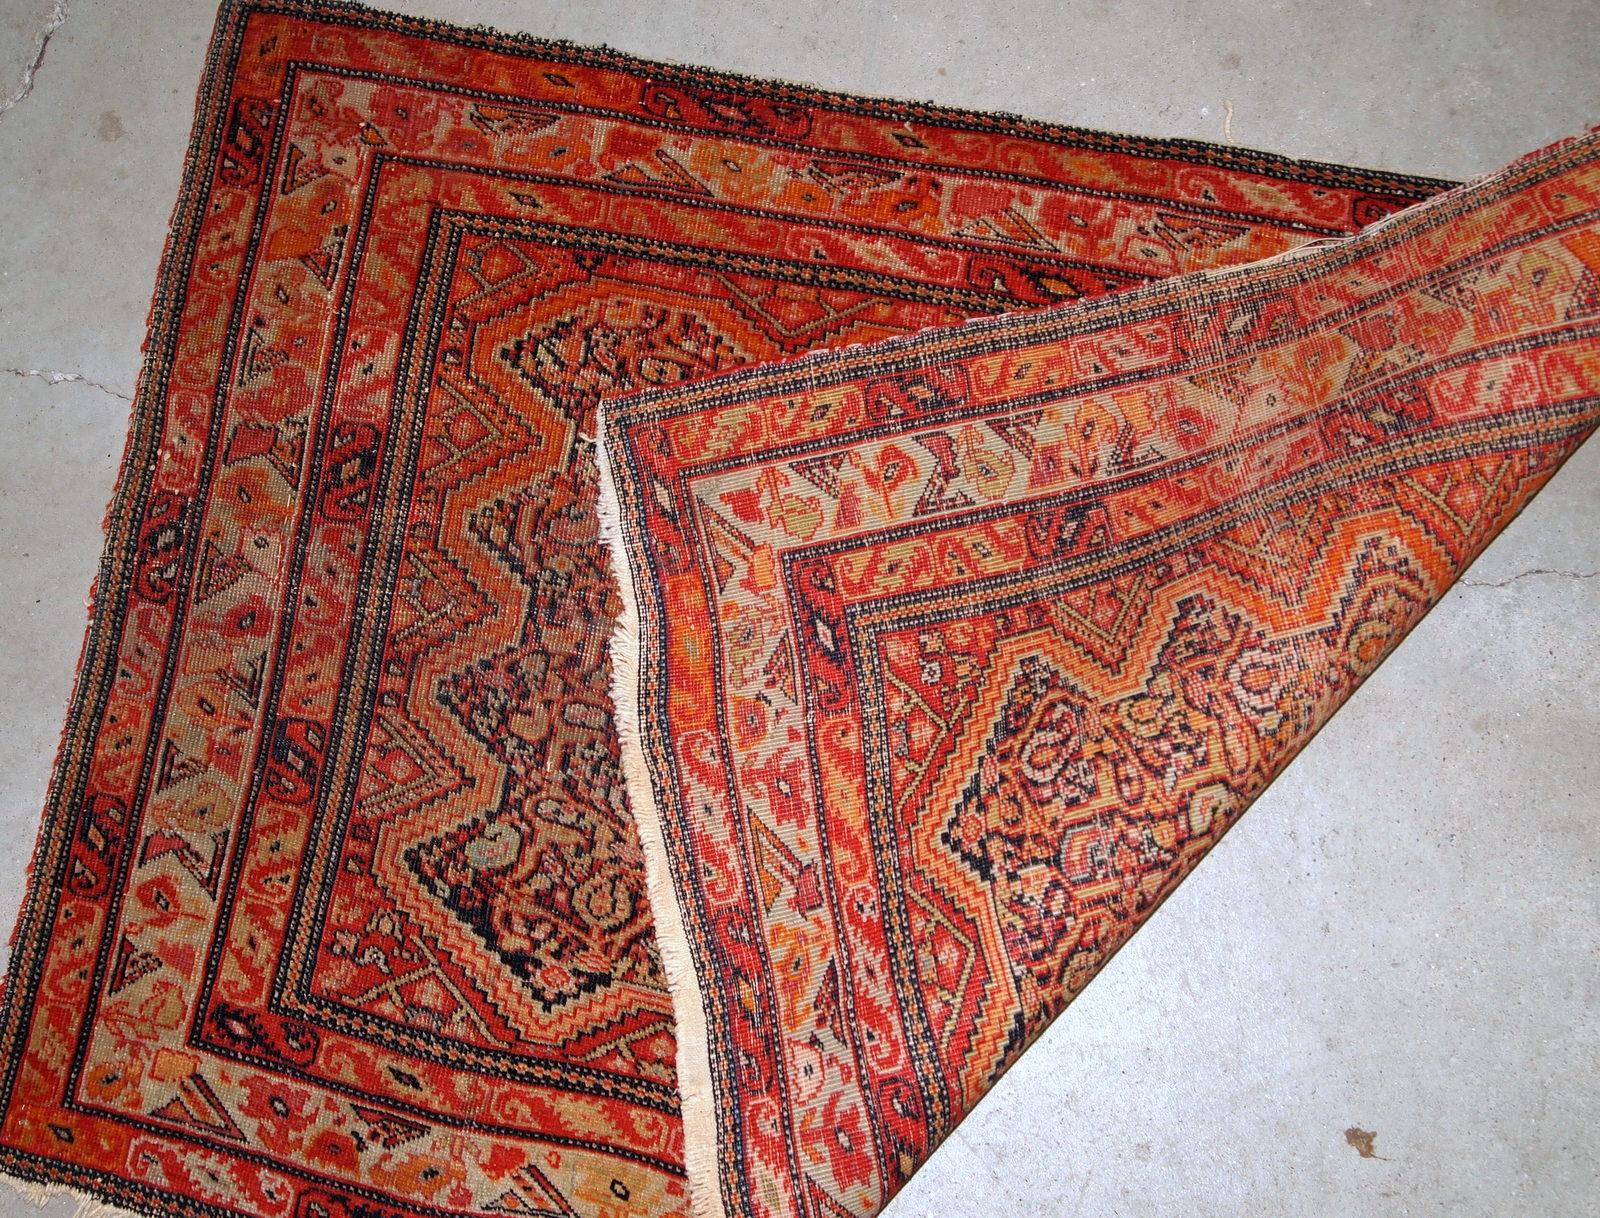 Handmade antique collectible Mishan Malayer style rug. This fine-weaved rug made in the end of 19th century and it is in original good condition, it has some low pile.

-Condition: original good, some low pile,

-circa: 1880s,

-Size: 2.3' x 3.7'